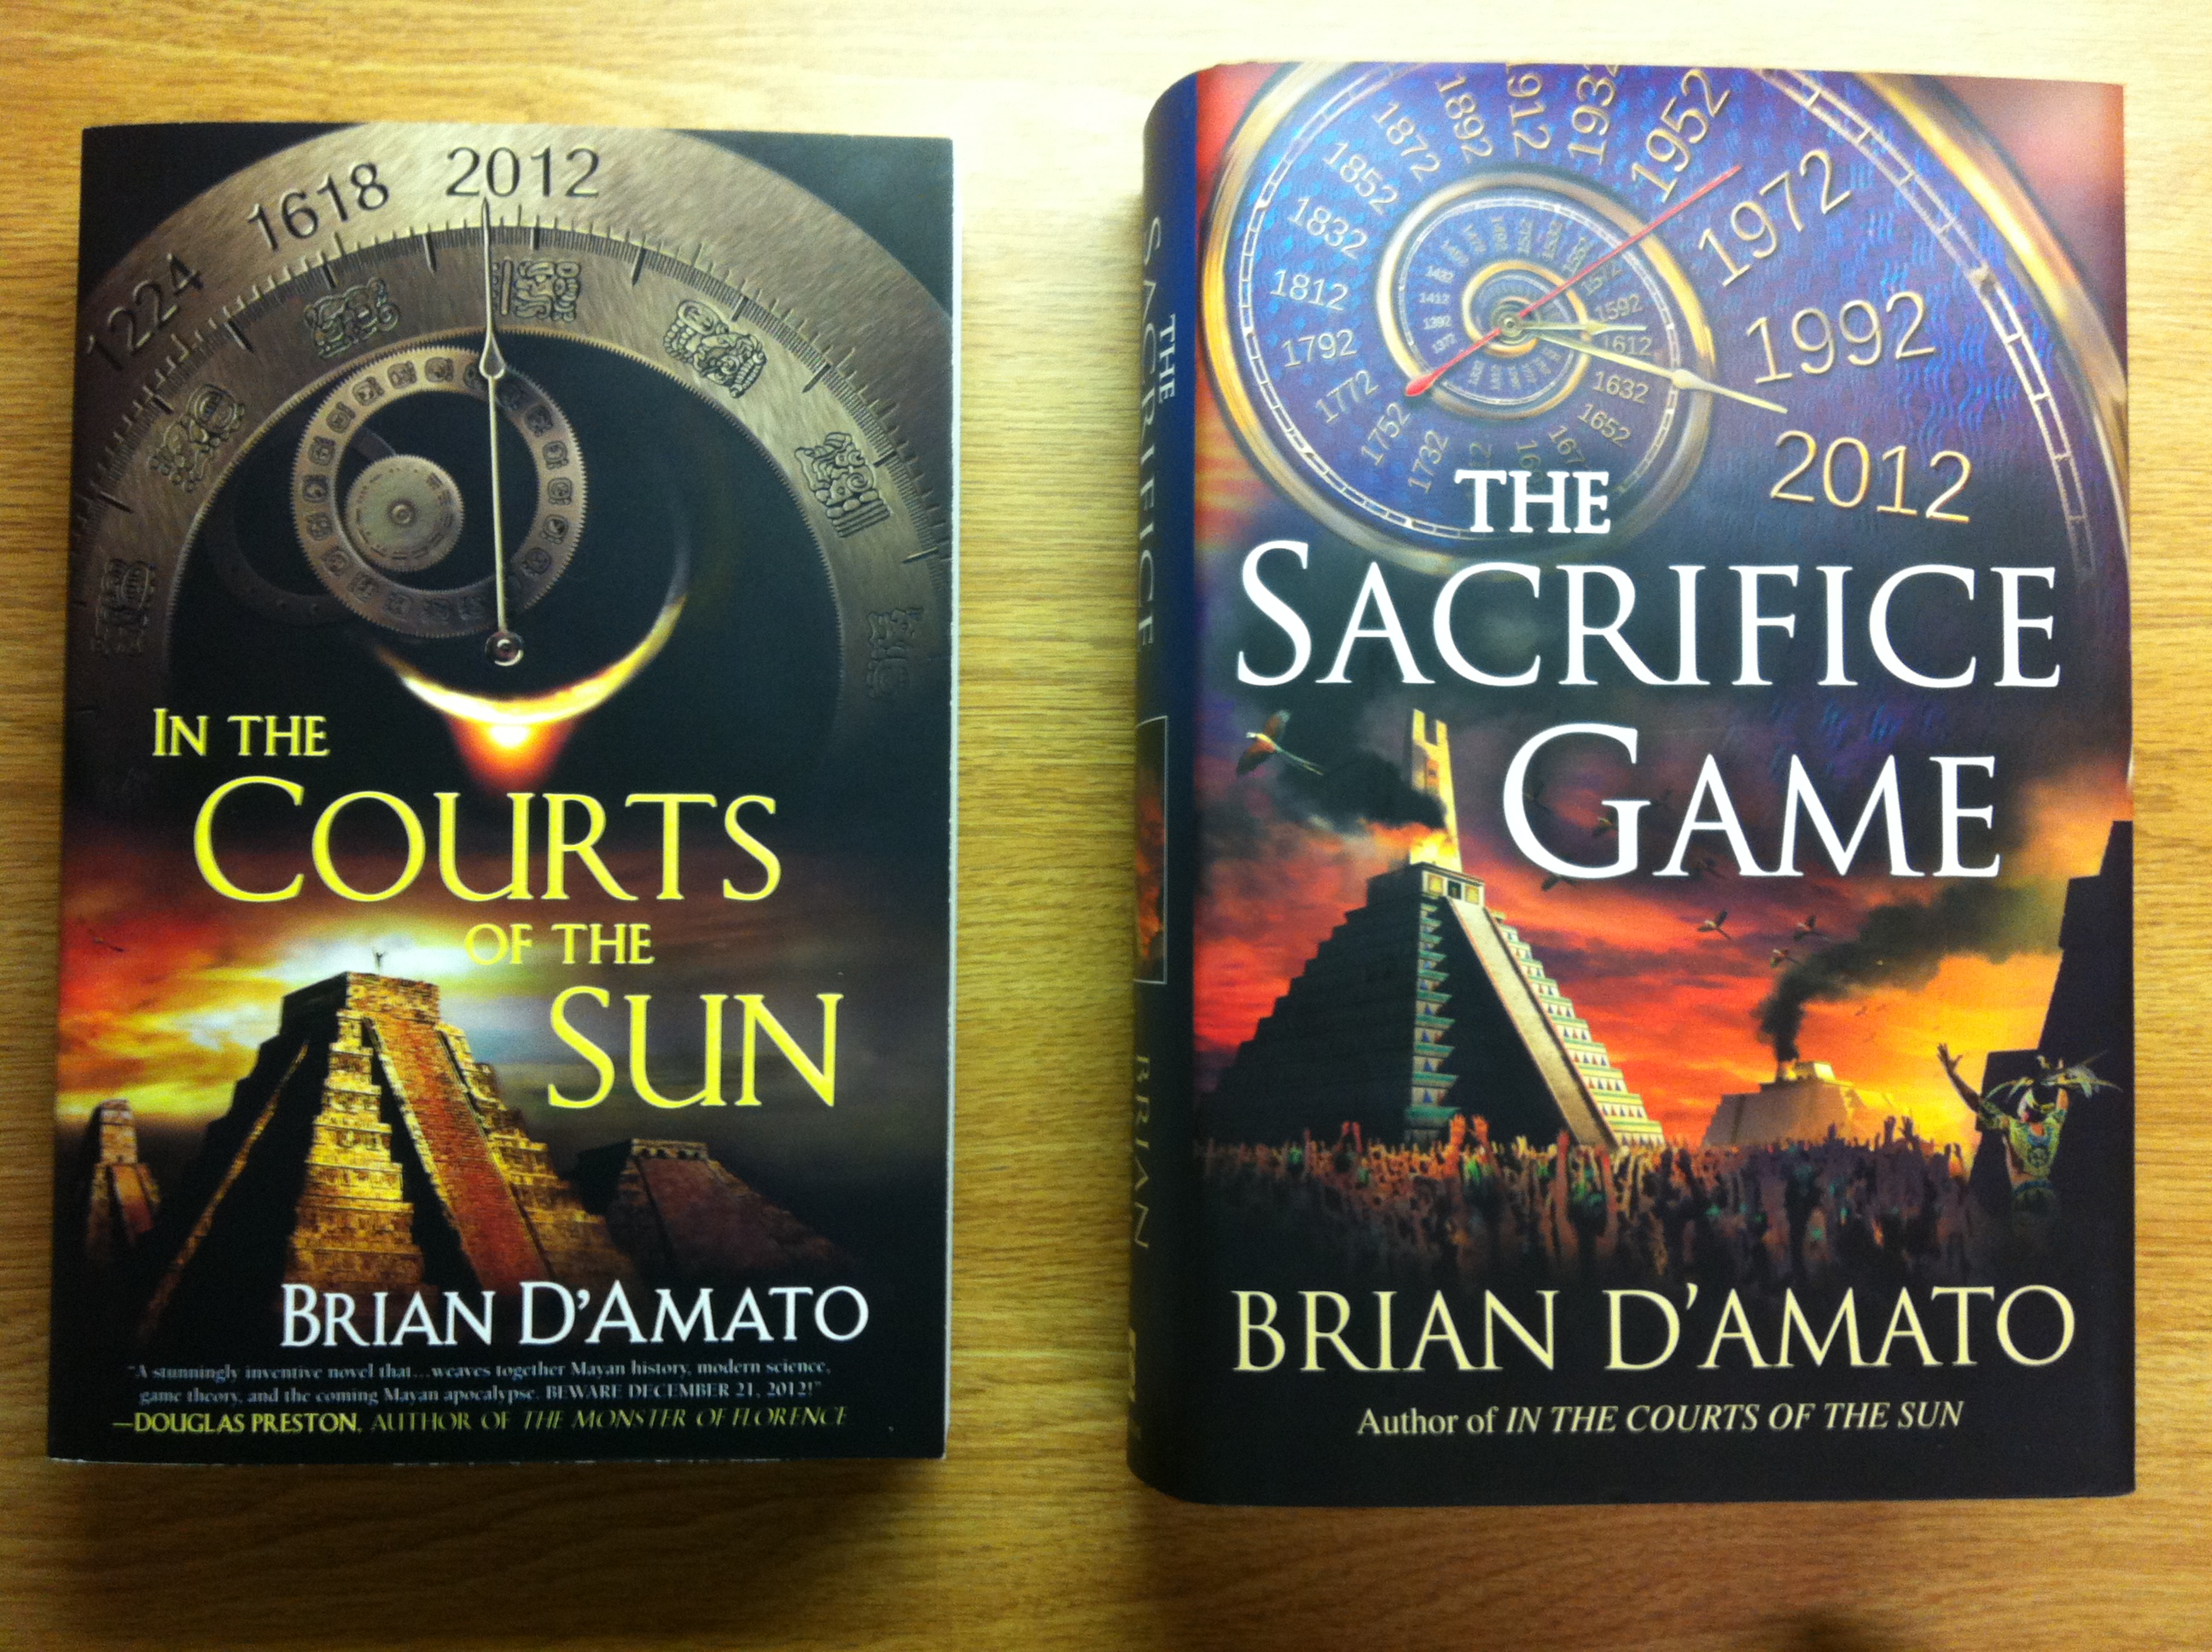 Brian D'Amato's "In the Courts of the Sun" and "The Sacrifice Game"